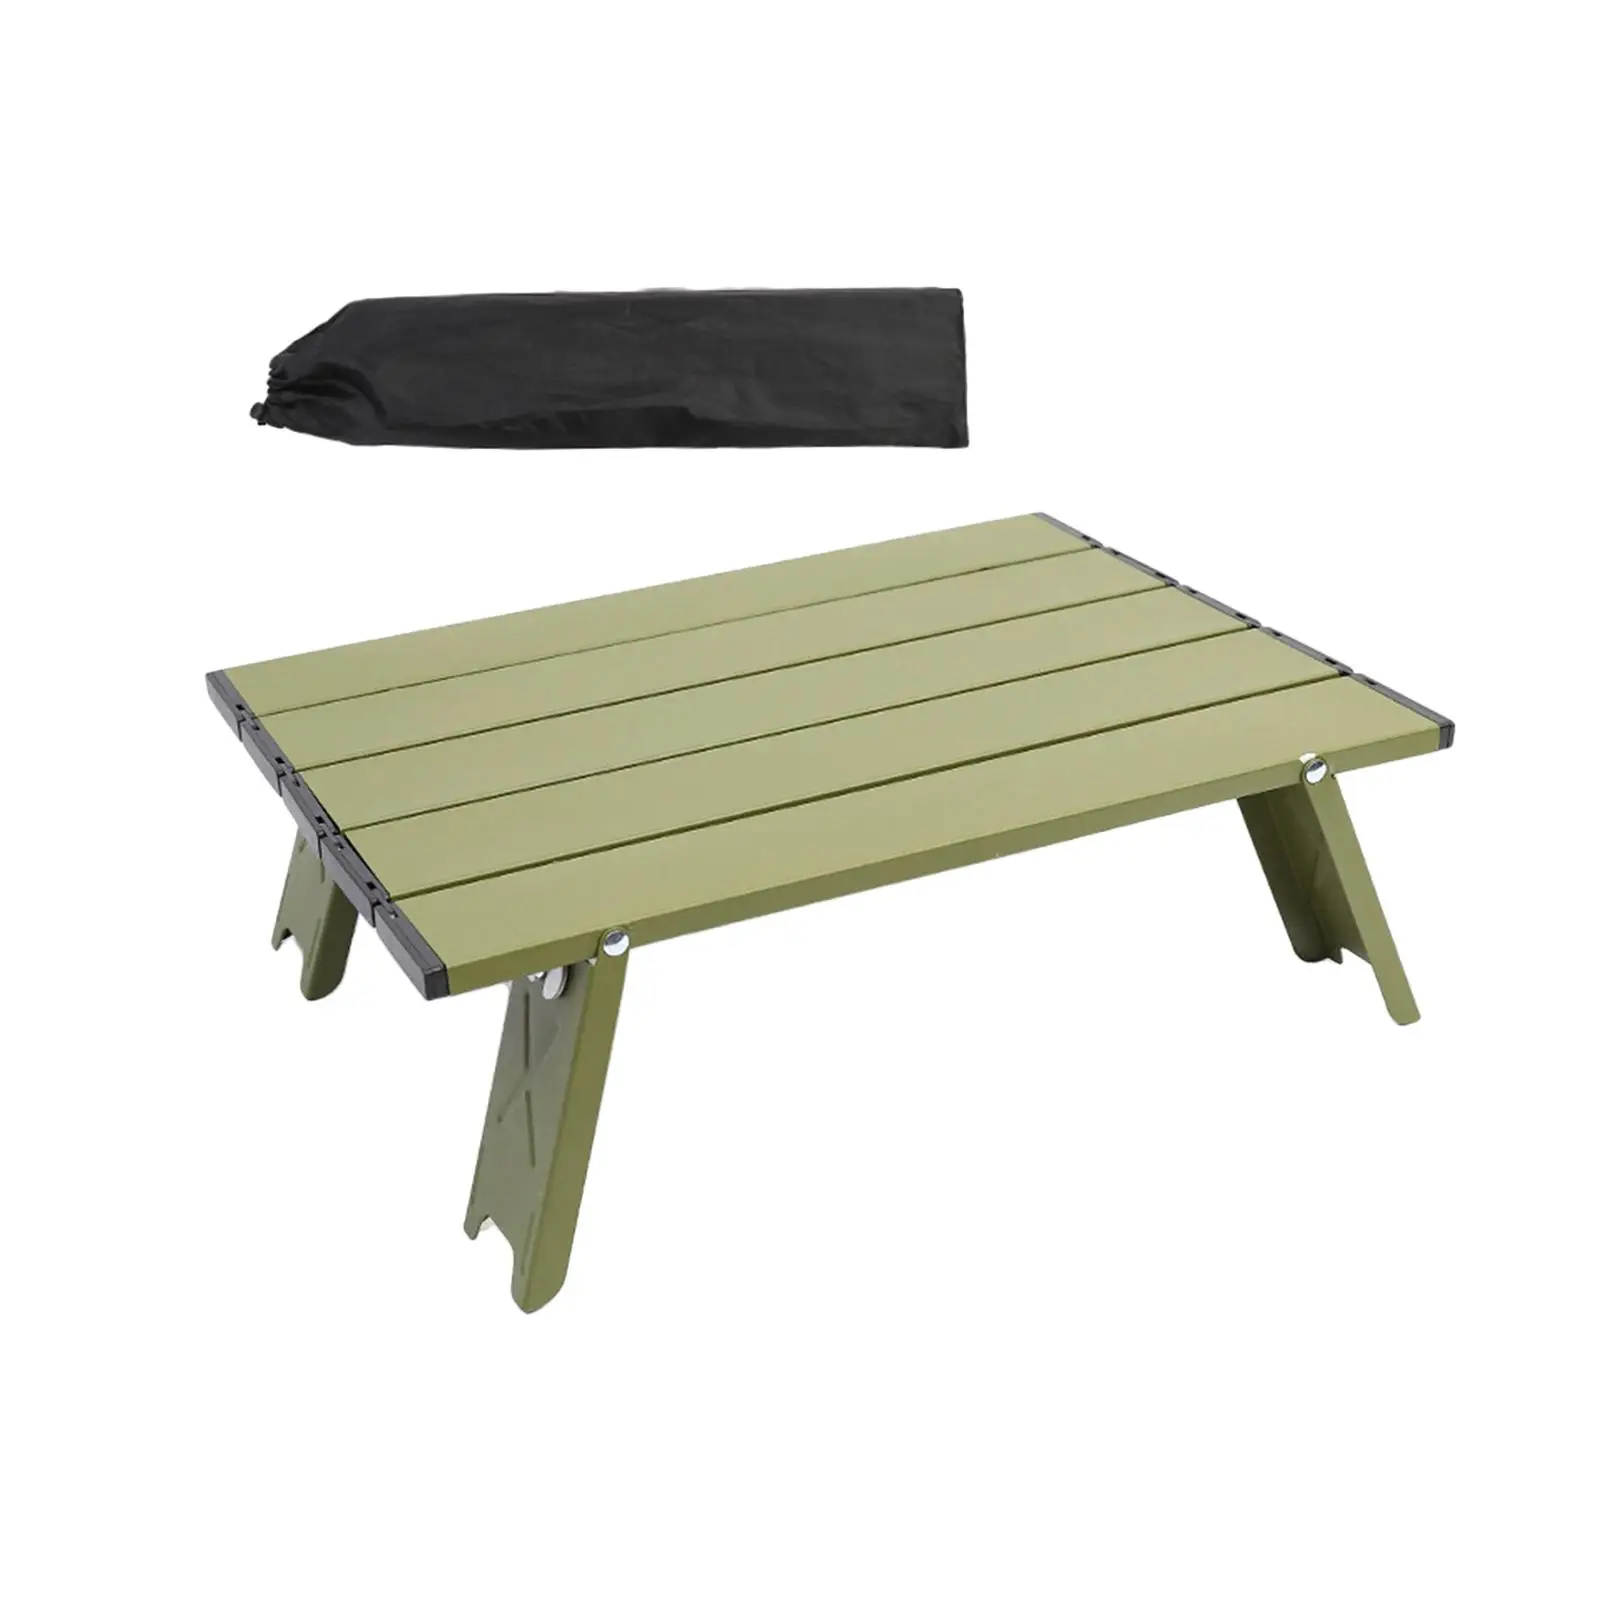 Camping Table Folding Foldable Durable Beach Table for Outdoor Climbing Yard